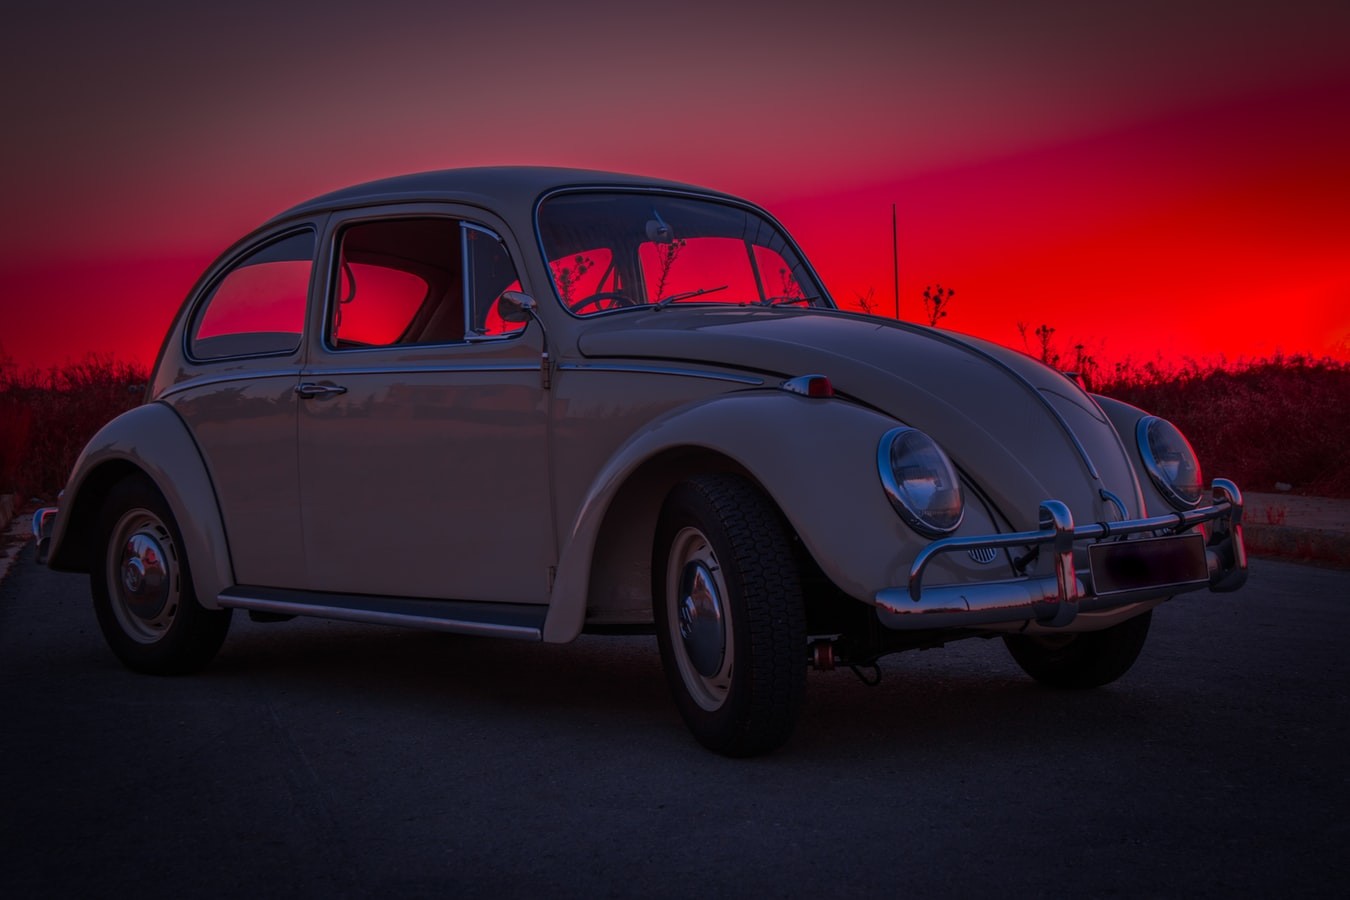 Oldtimer Beetle in Cheswick, Pennsylvania | Goodwill Car Donations